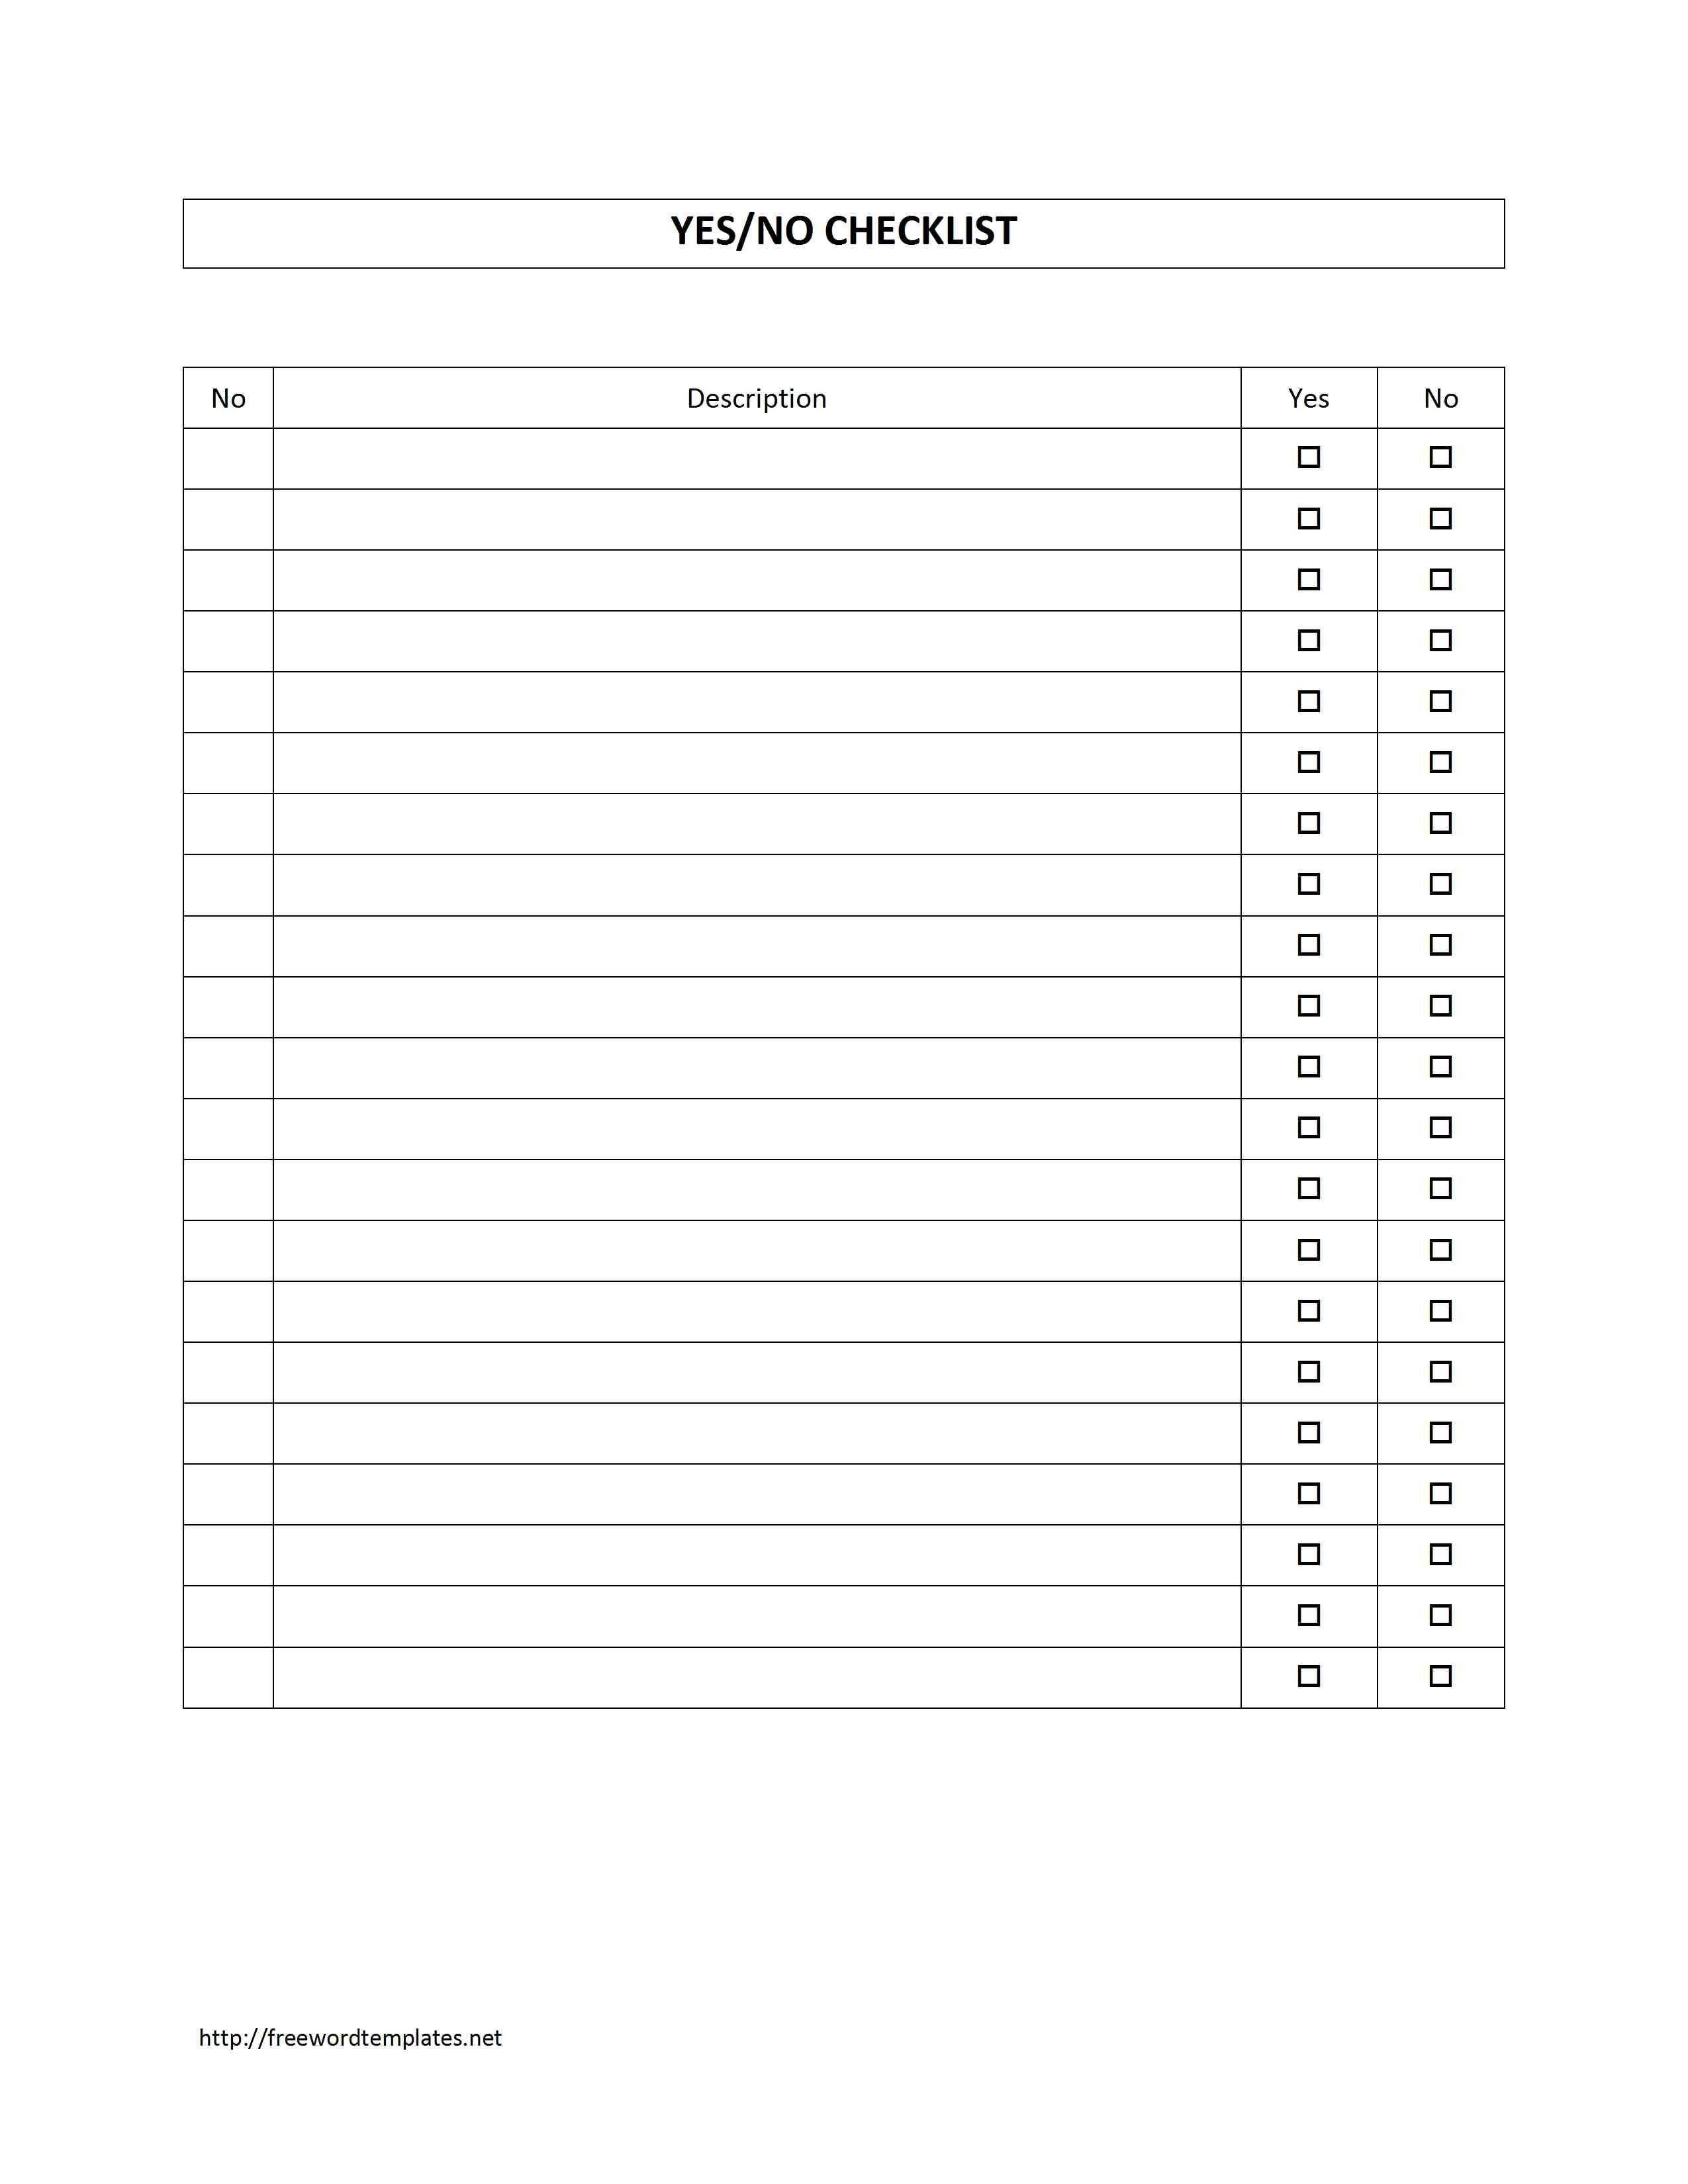 Survey Sheet With Yes/no Checklist Template | Free Microsoft With Regard To Poll Template For Word